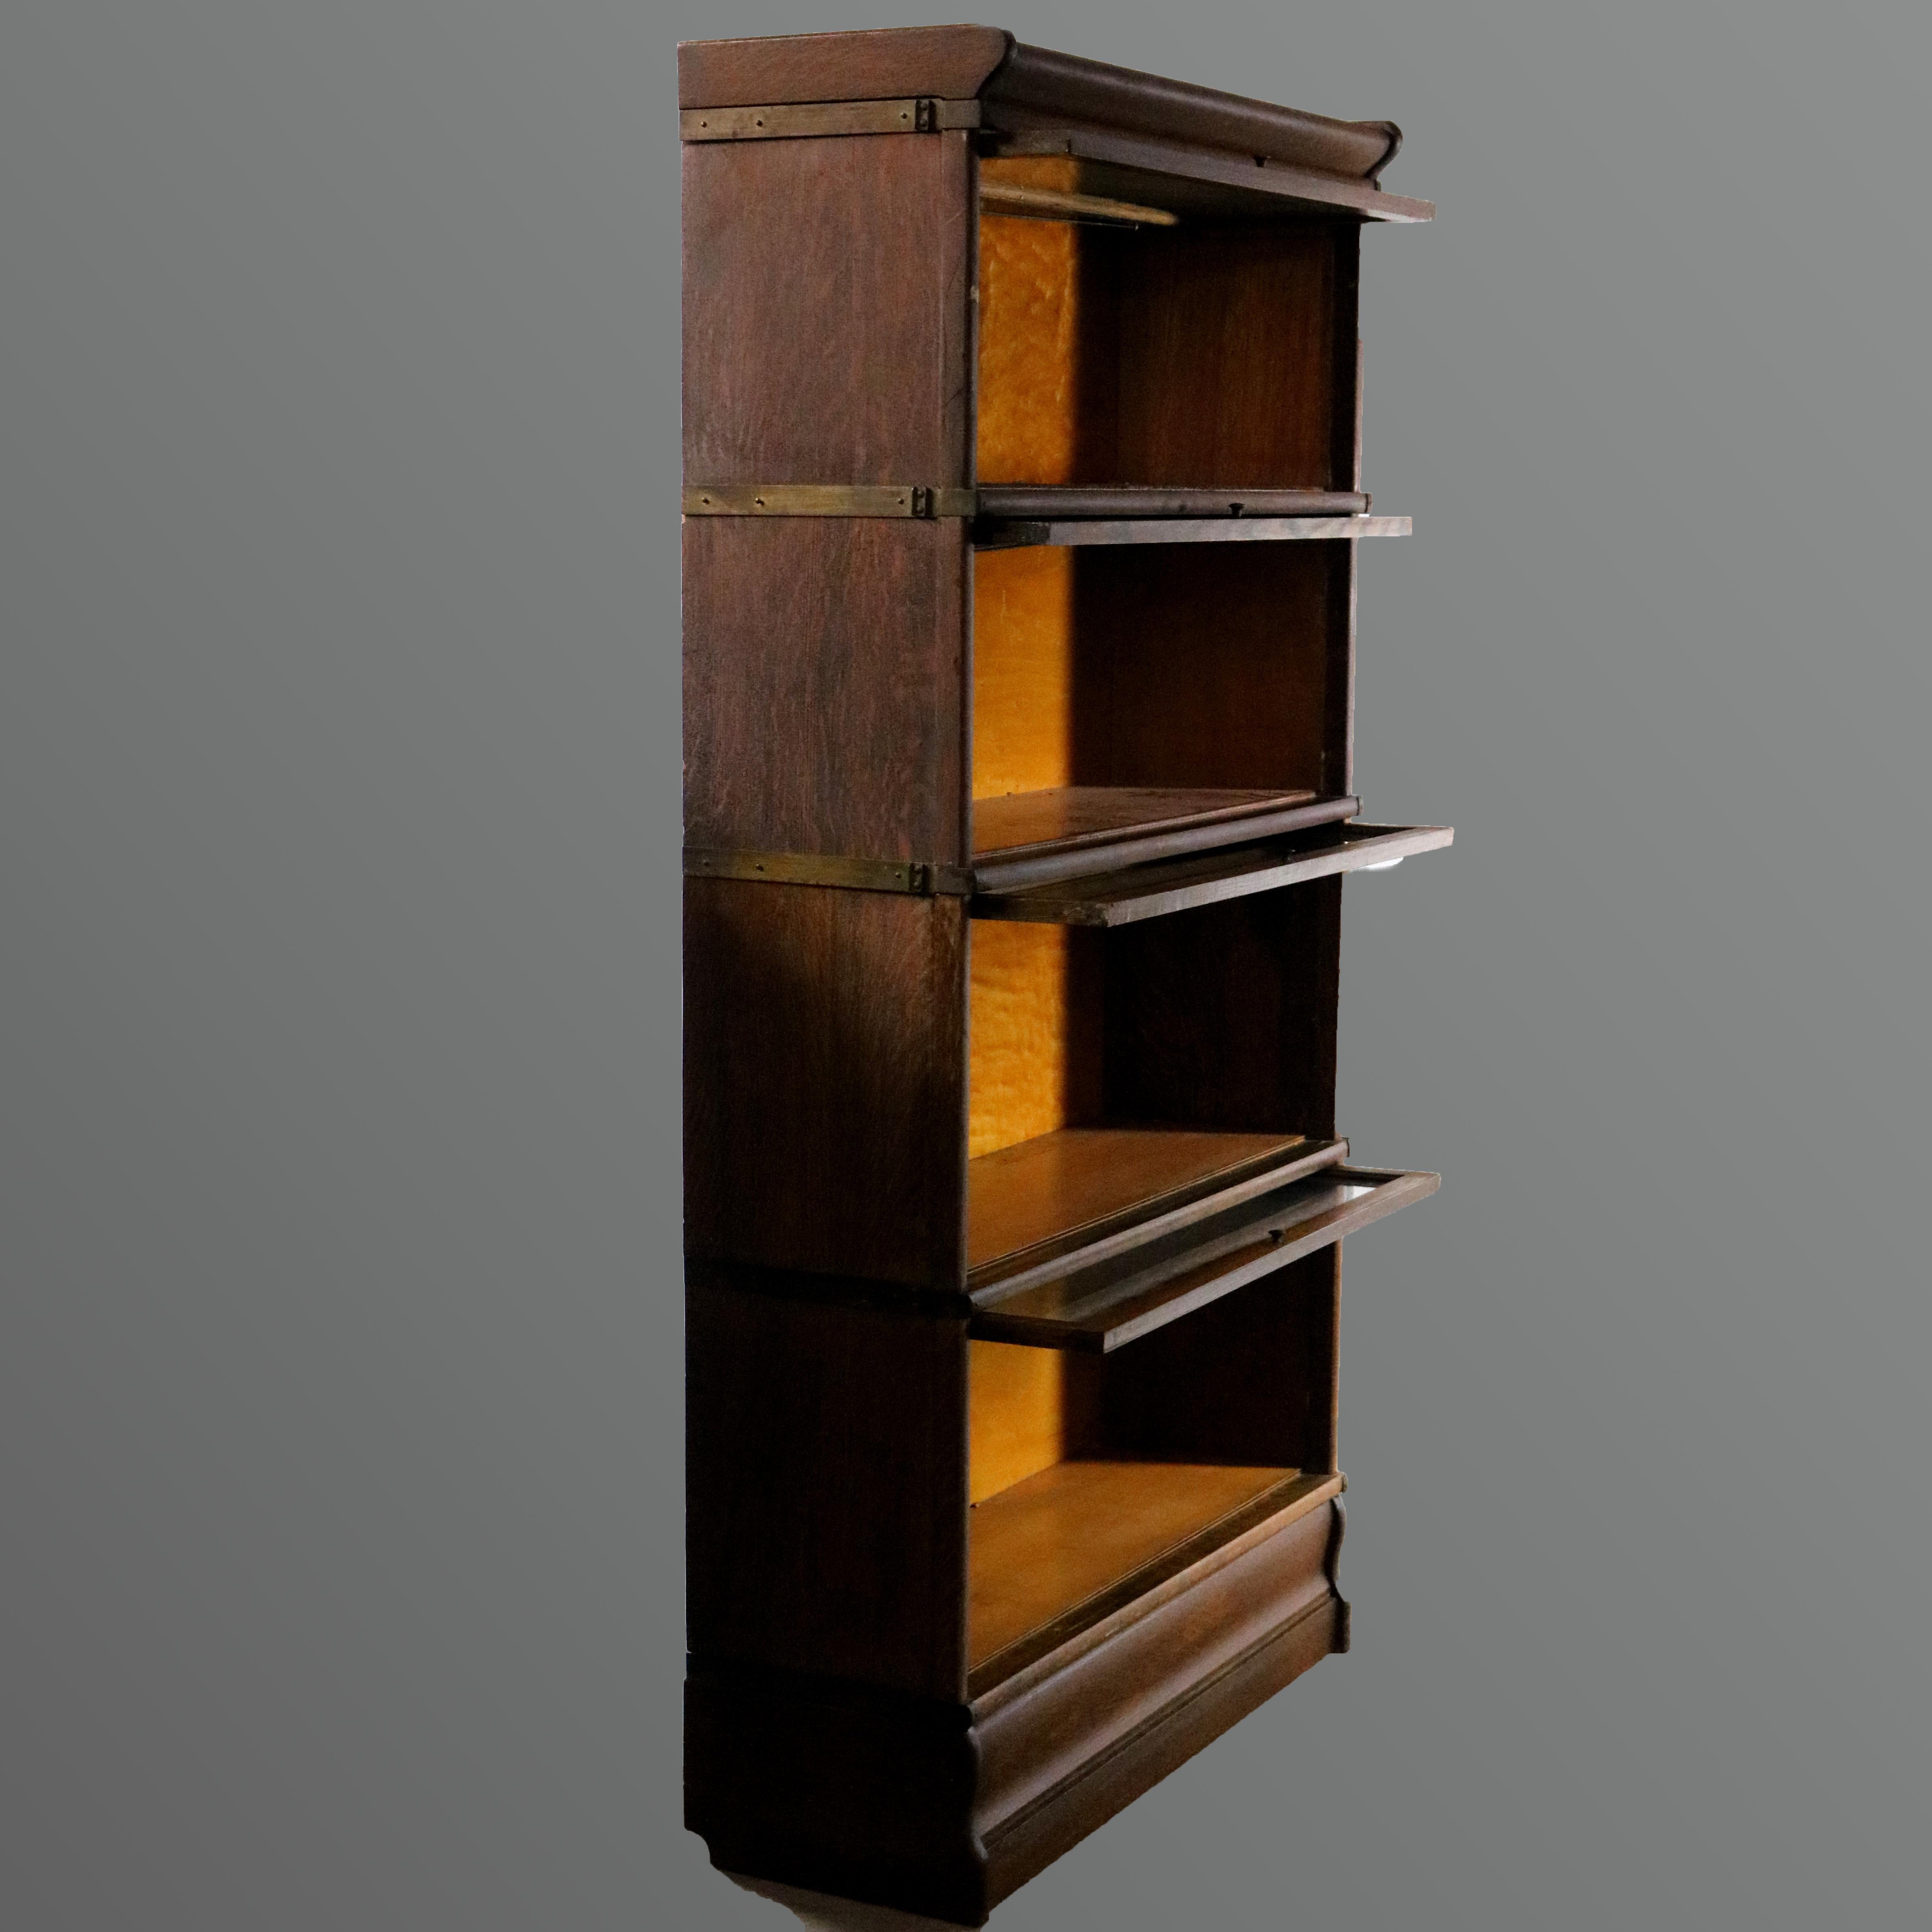 An Arts & Crafts sectional Barrister bookcase by Hale's, Herkimer, NY, offers quarter sawn oak construction with four stacks having a pull-down glass door on shaped base surmounted by removable crown, circa 1920

Measures- 63.25